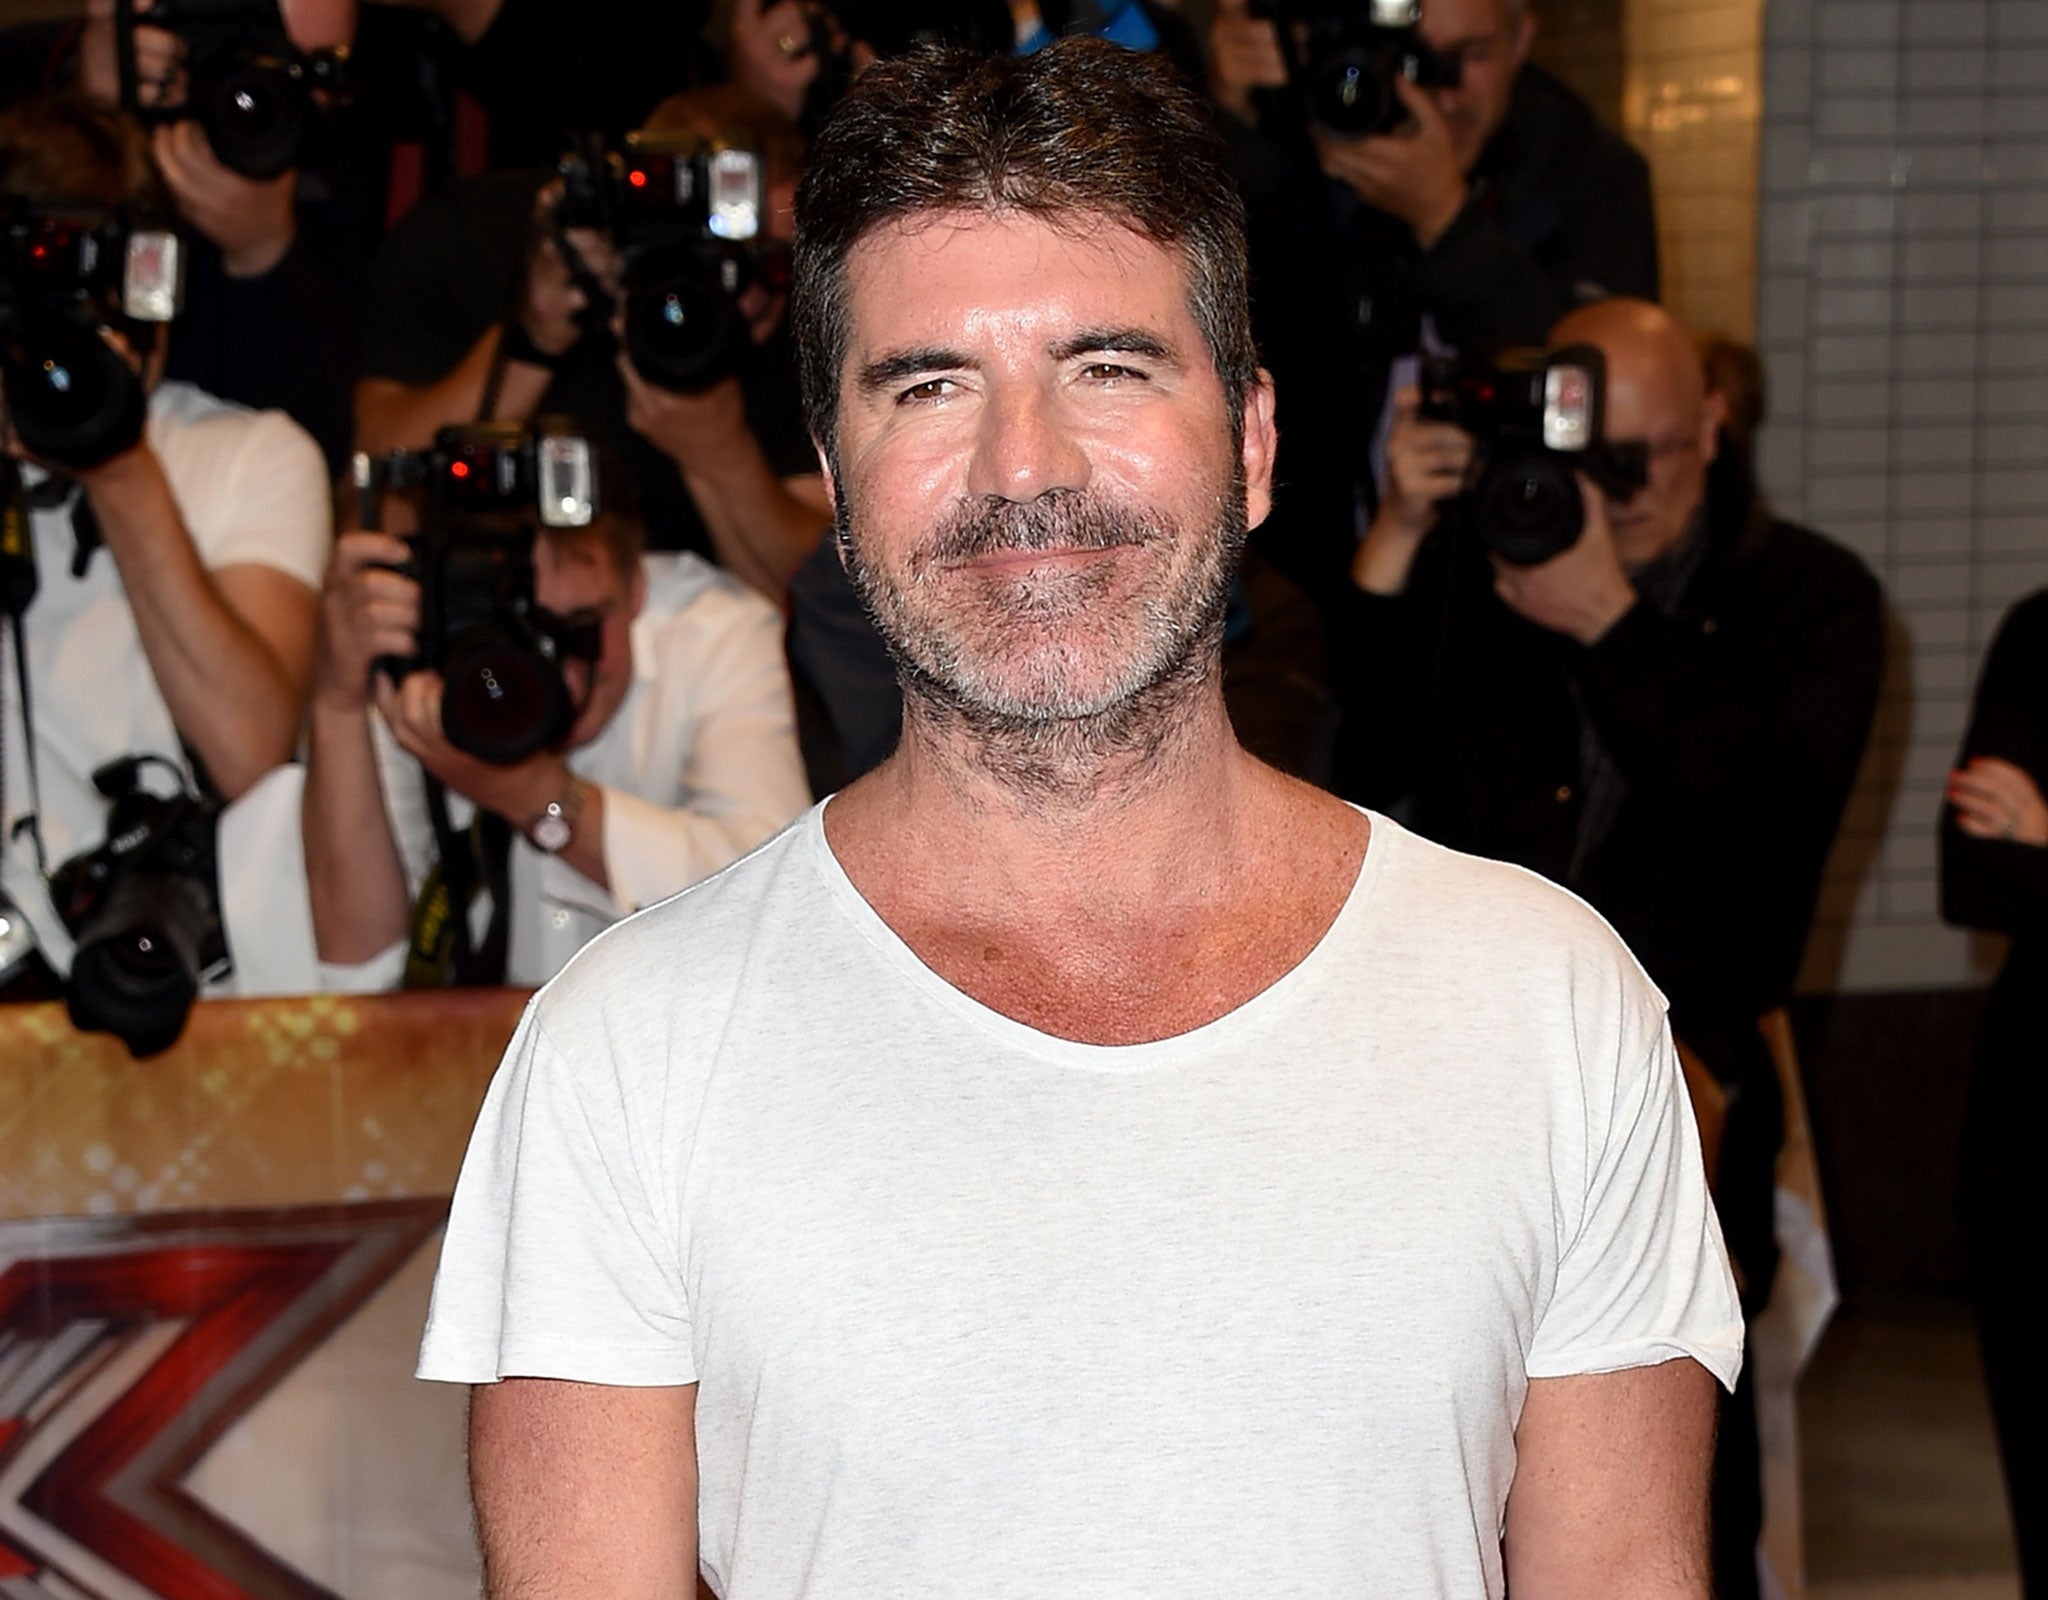 The X-factor judge completed a test which predicts he will live until 2055